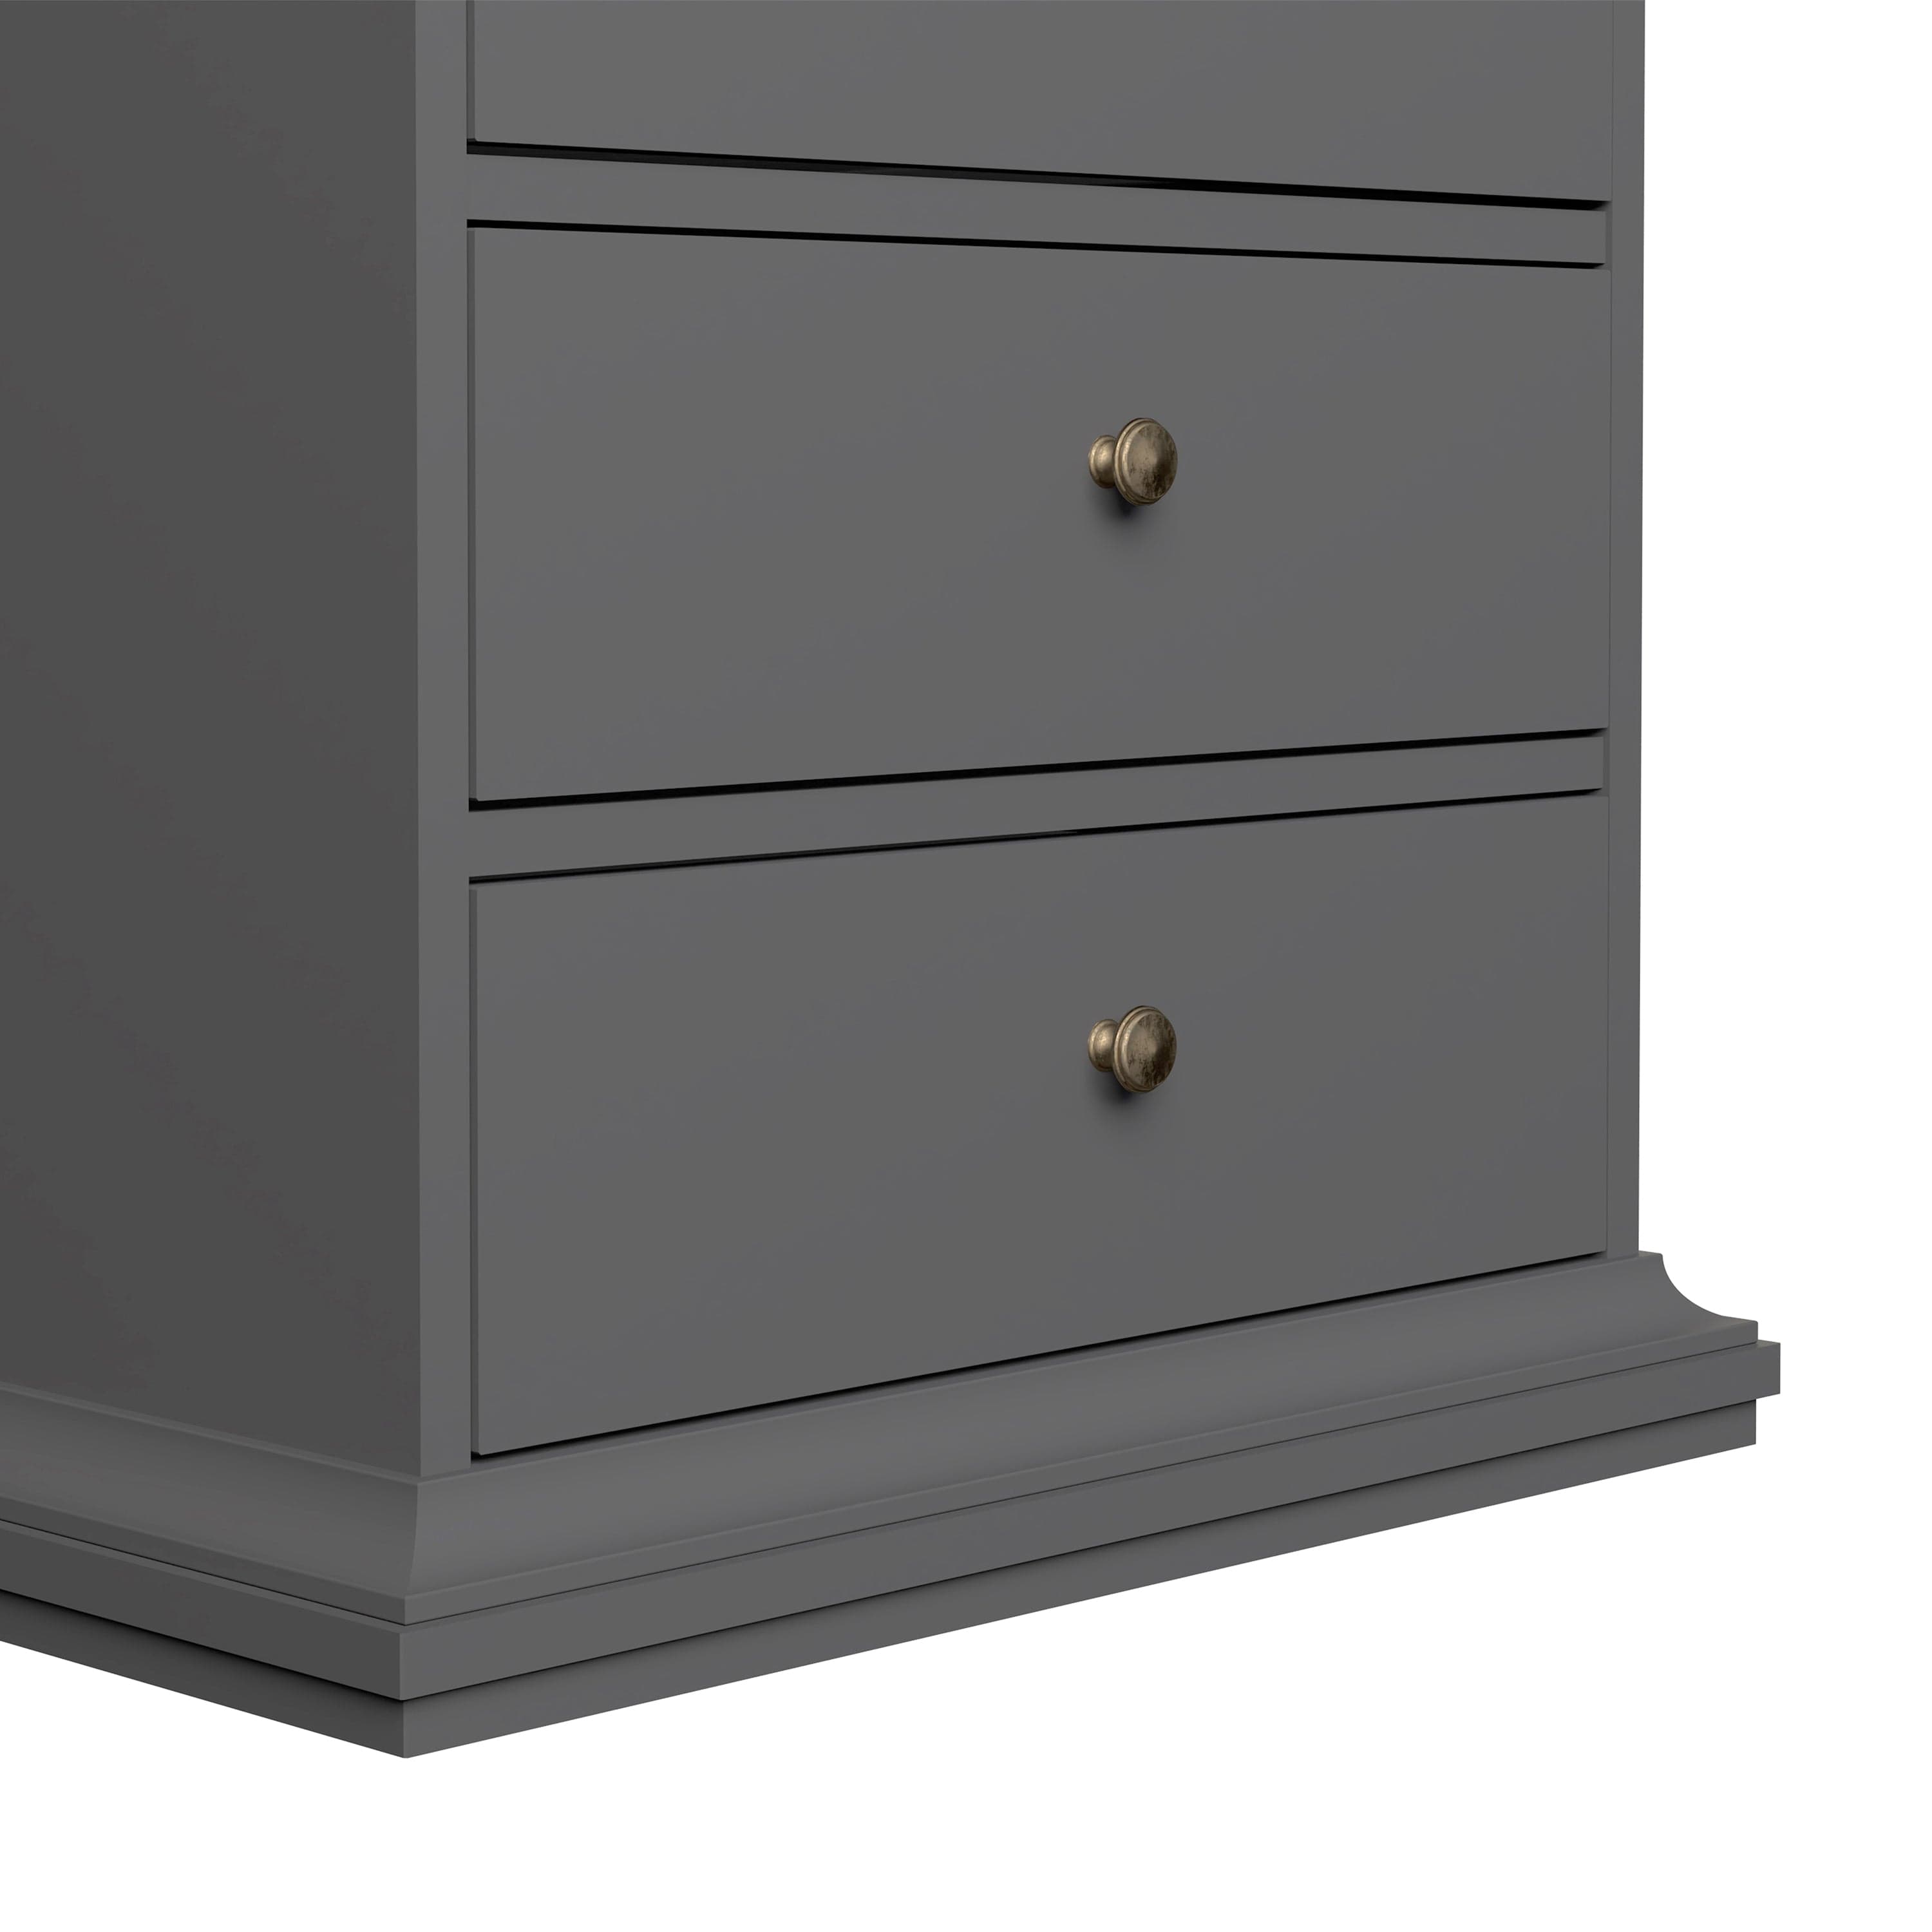 FTG Chest Of Drawers Paris Chest of 5 drawers in Matt Grey Bed Kings